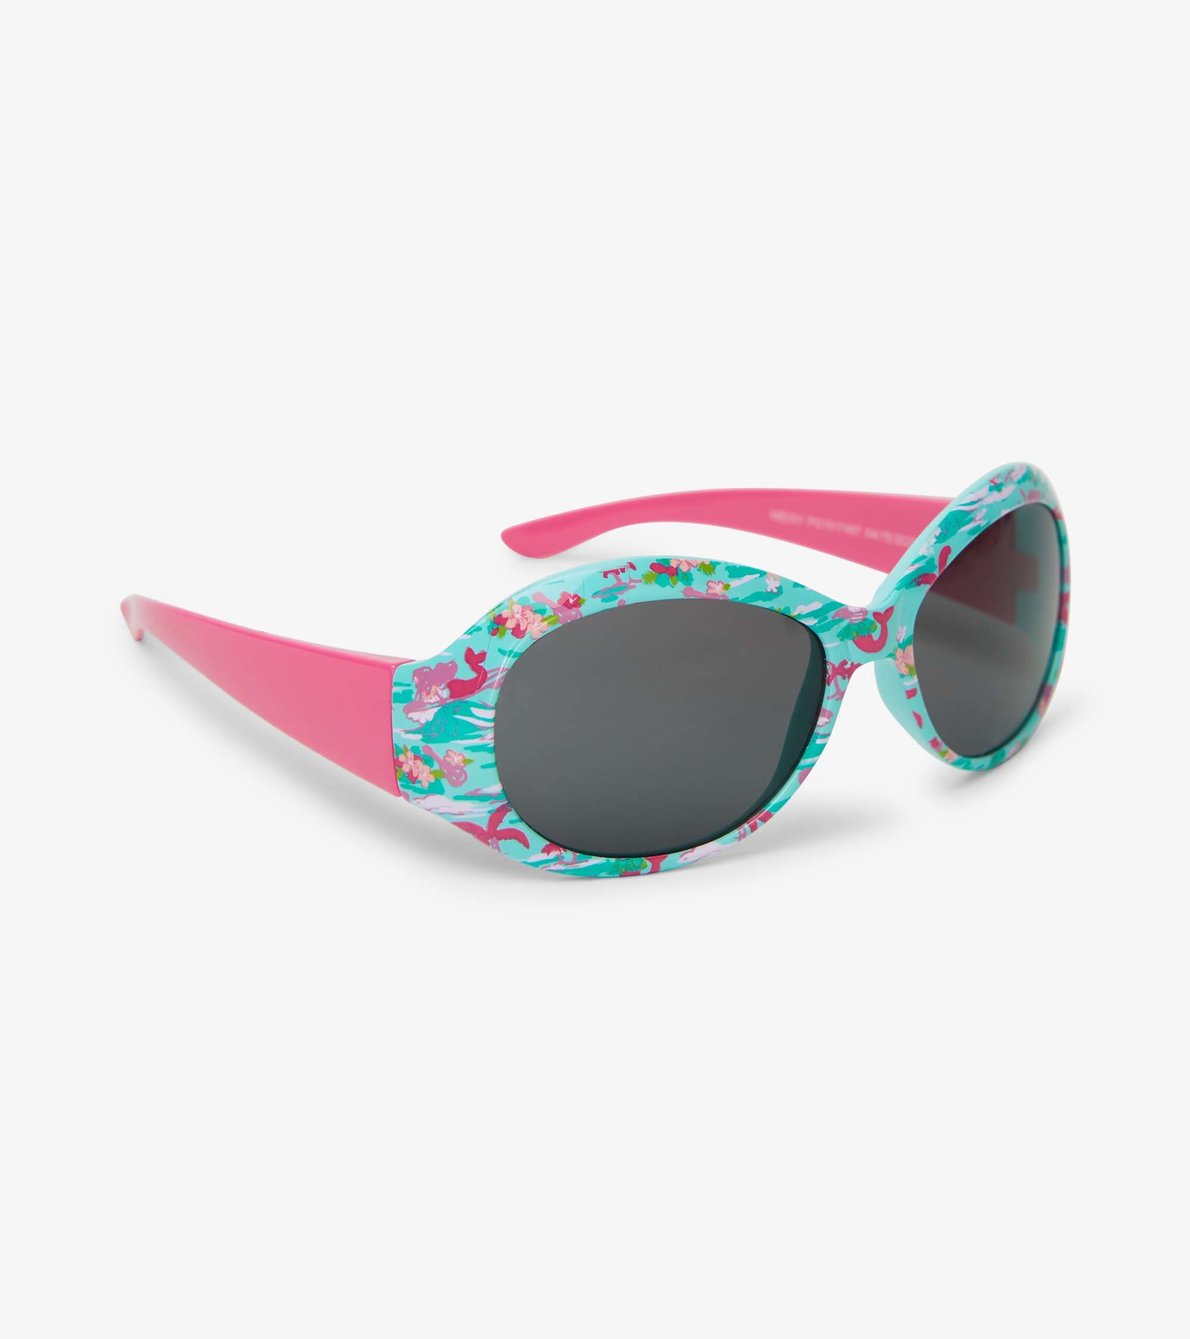 View larger image of Tropical Mermaid Sunglasses